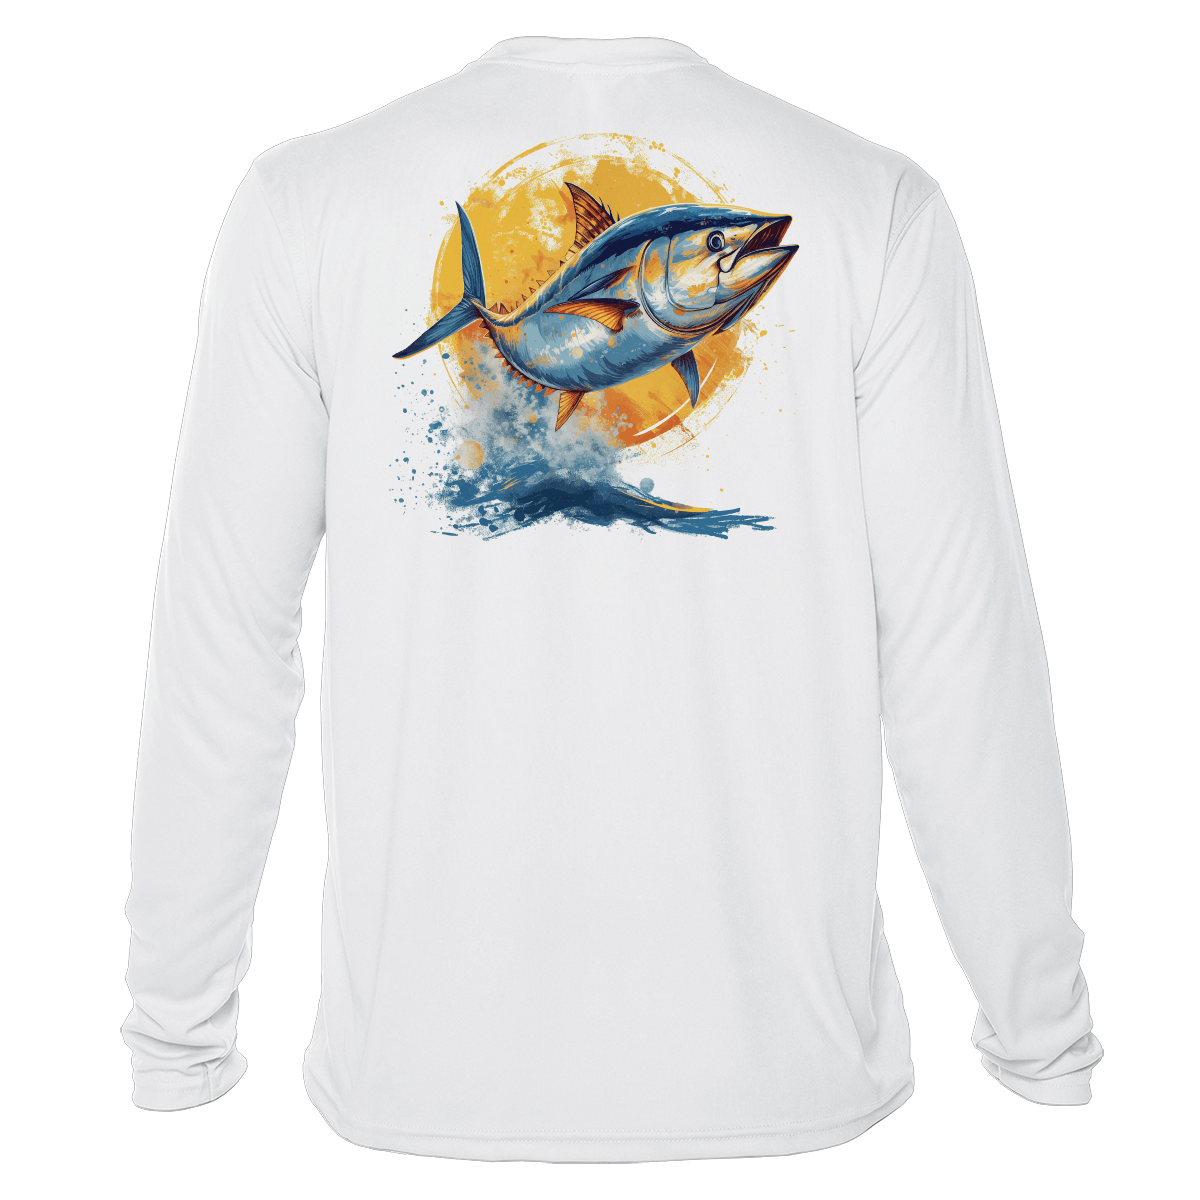 Fishing Shirt Outfitters - Angler's Collection: Yellowfin Tuna